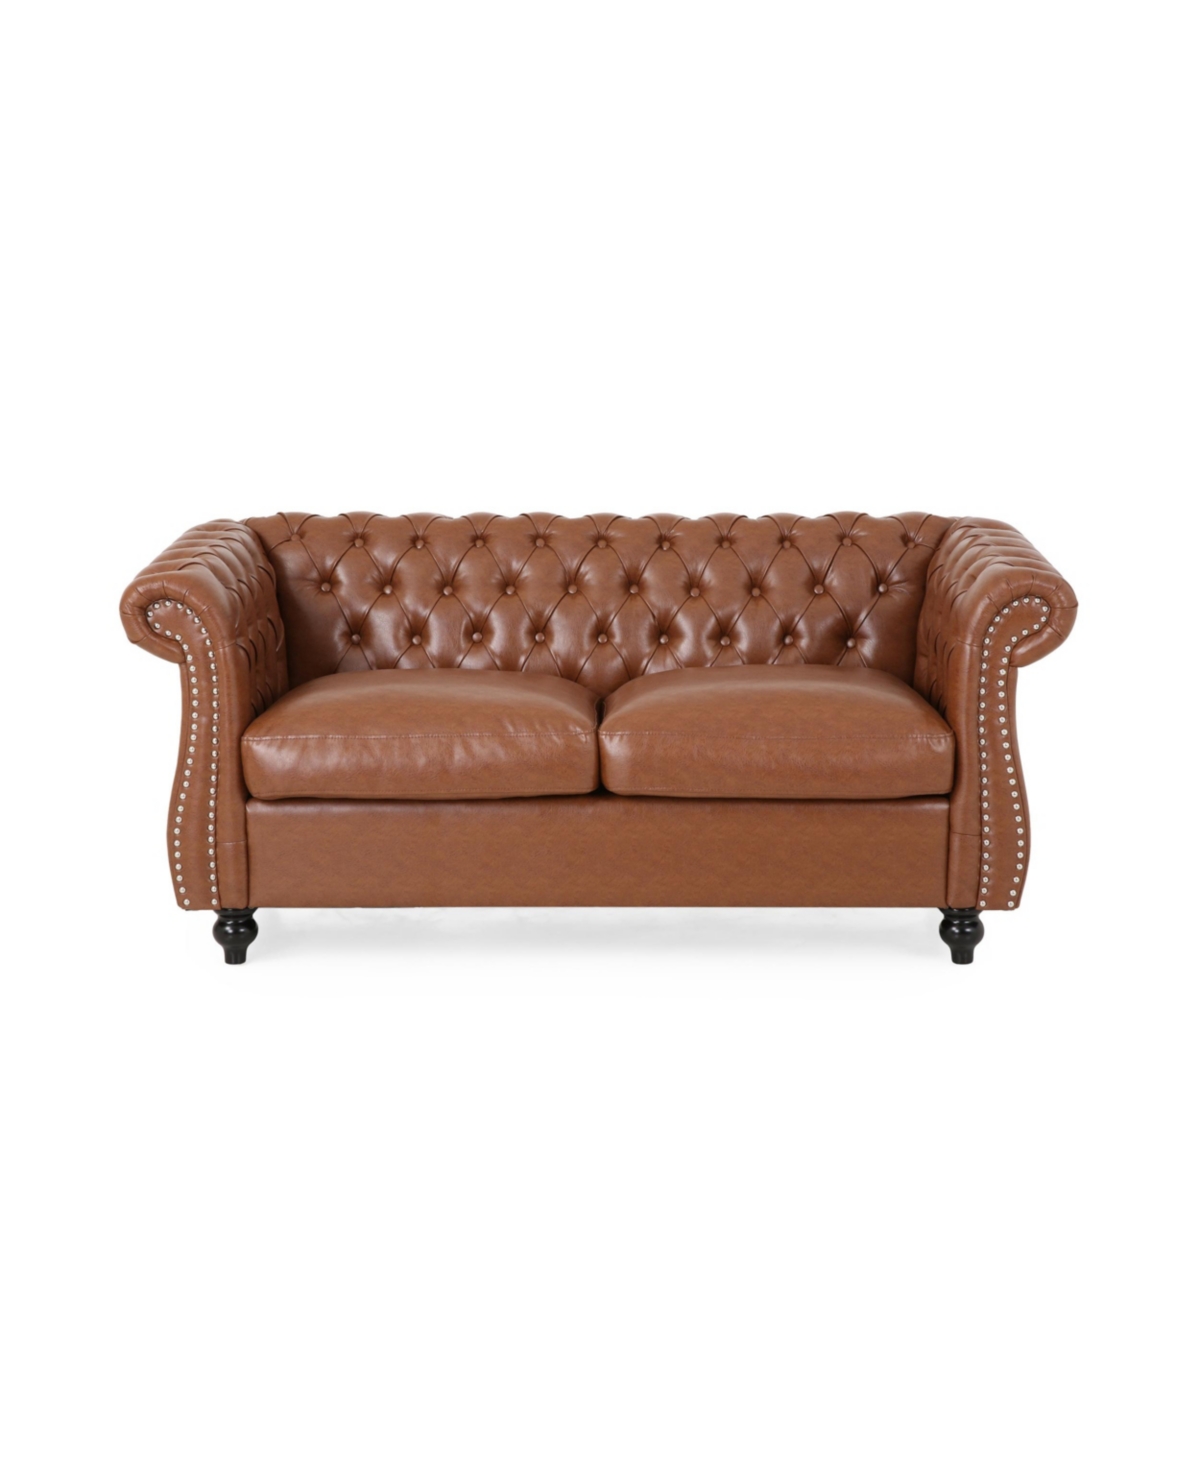 Noble House Silverdale Traditional Chesterfield Loveseat In Cognac Brown